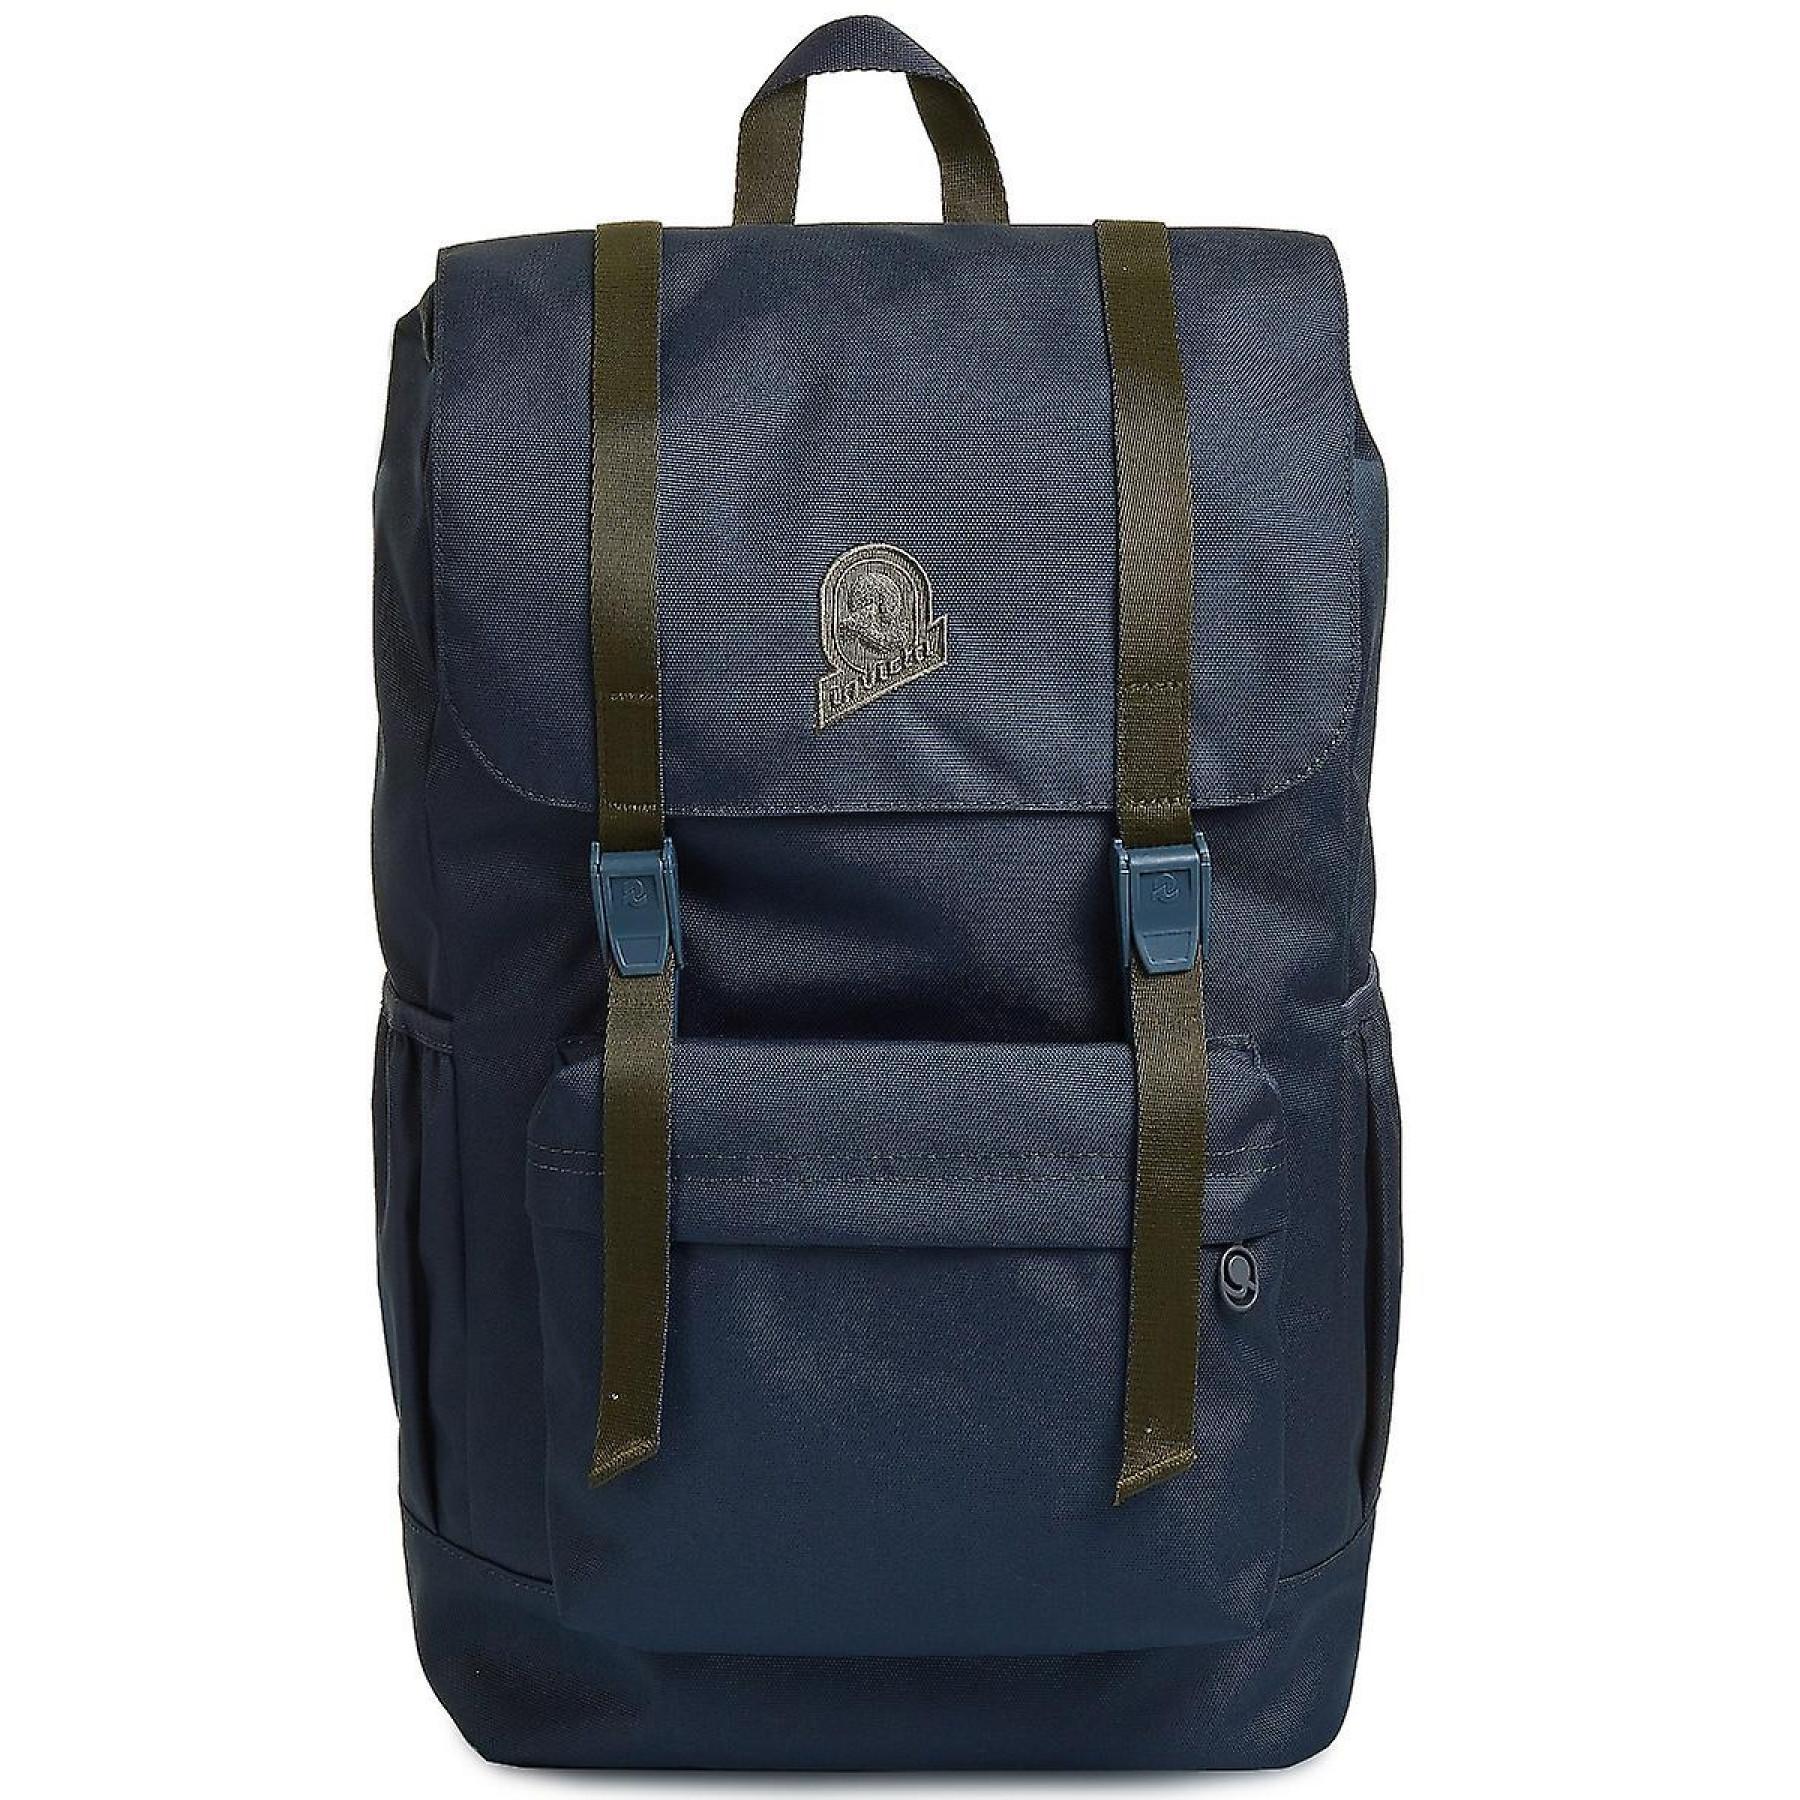 Backpack Invicta Chat solid